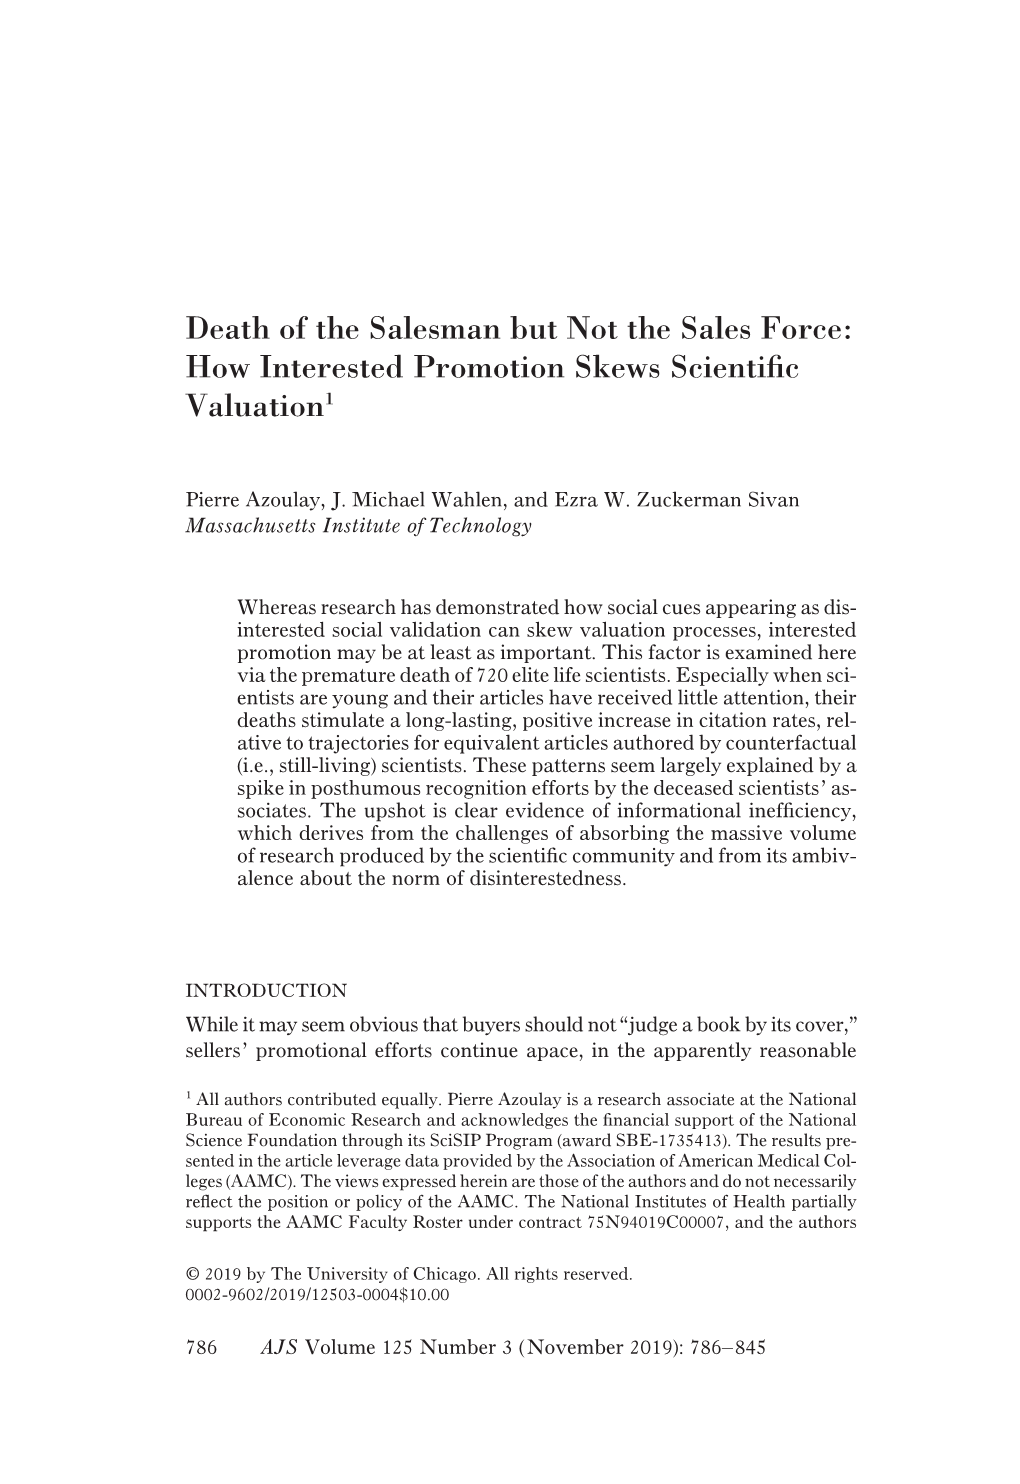 Death of the Salesman but Not the Sales Force: How Interested Promotion Skews Scientiﬁc Valuation1